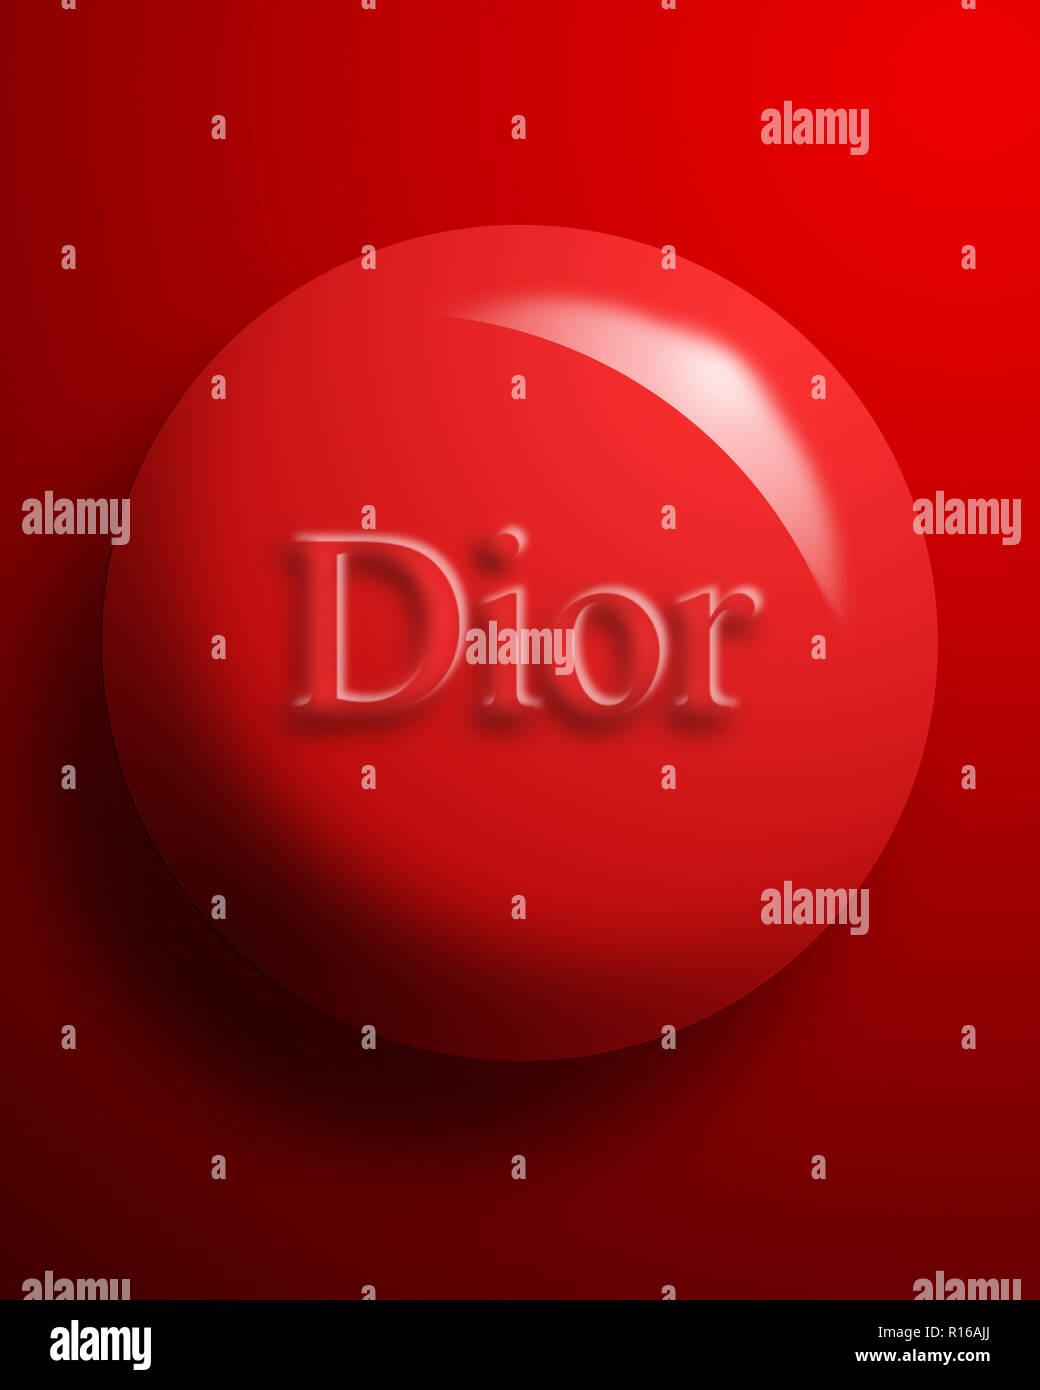 Global fashion and beauty brand name Dior on red circle, close up Stock Photo